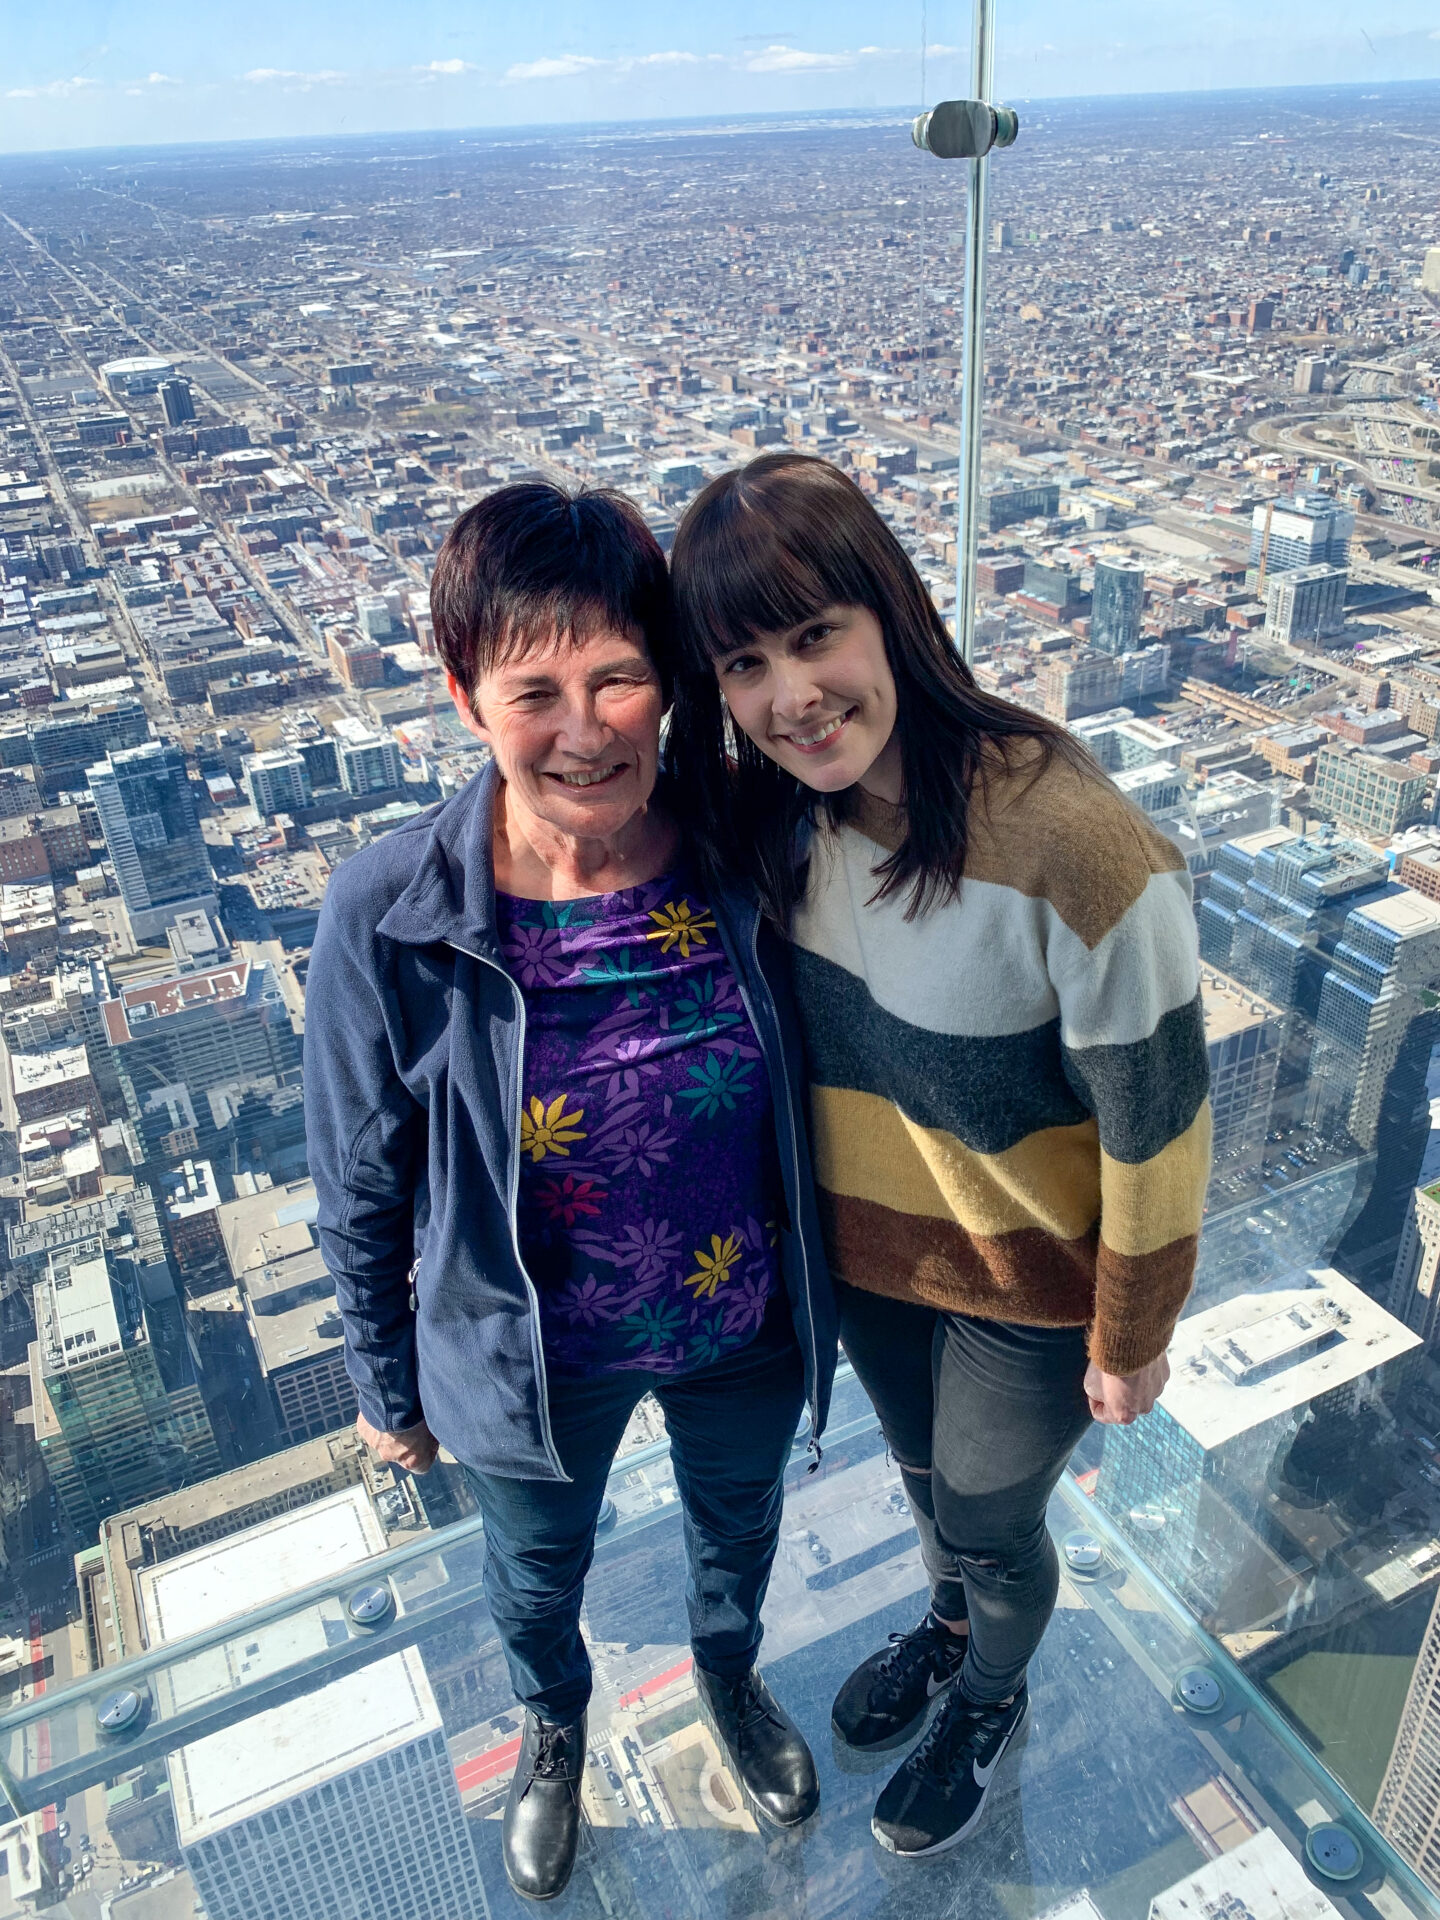 Willis Tower Observation Deck is great for a Chicago itinerary